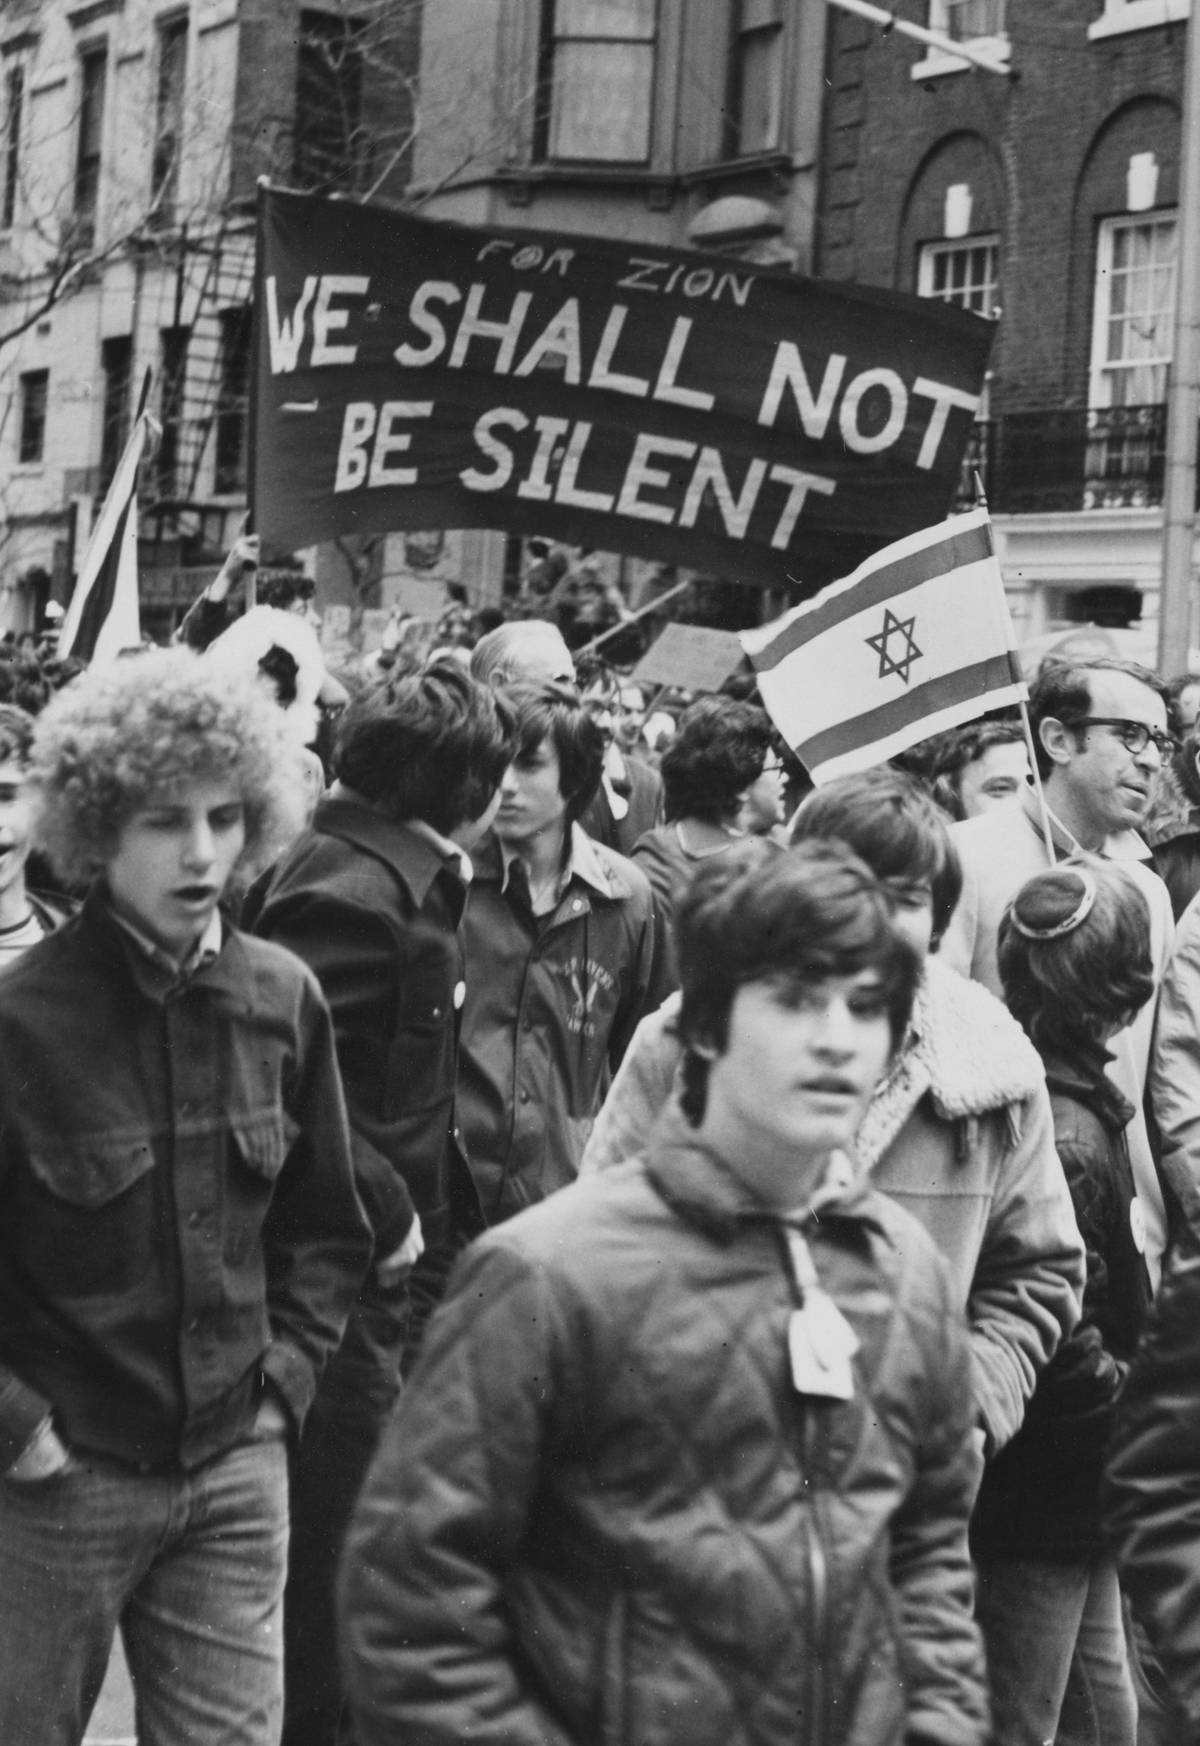 Solidarity Sunday for Soviet Jewry demonstration in protest at the Soviet Union's treatment of Jewish people, in New York City, New York, 13th April 1975.